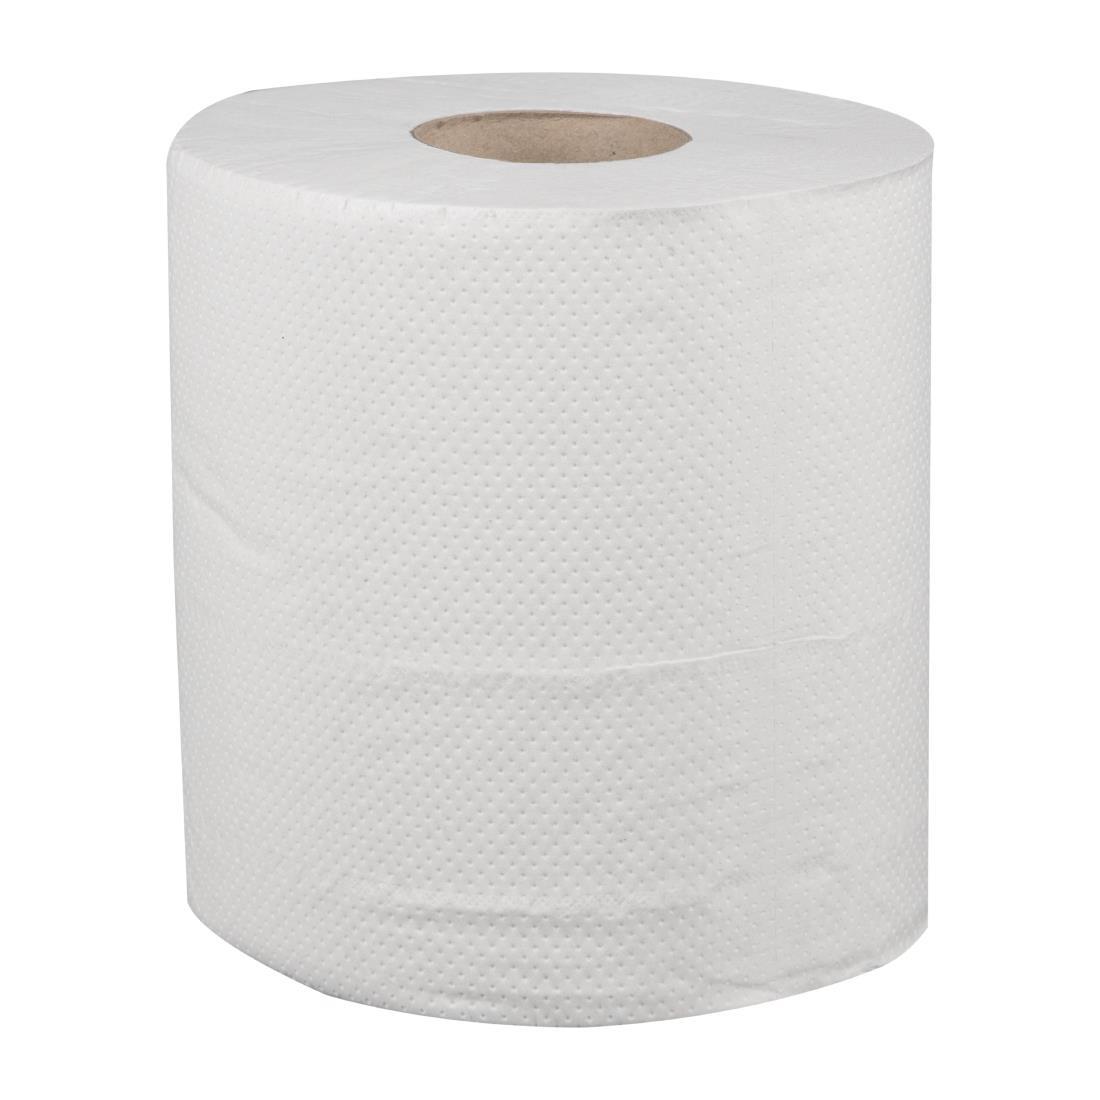 Jantex Centrefeed White Rolls 2-Ply 120m (Pack of 6) - DL920  - 4